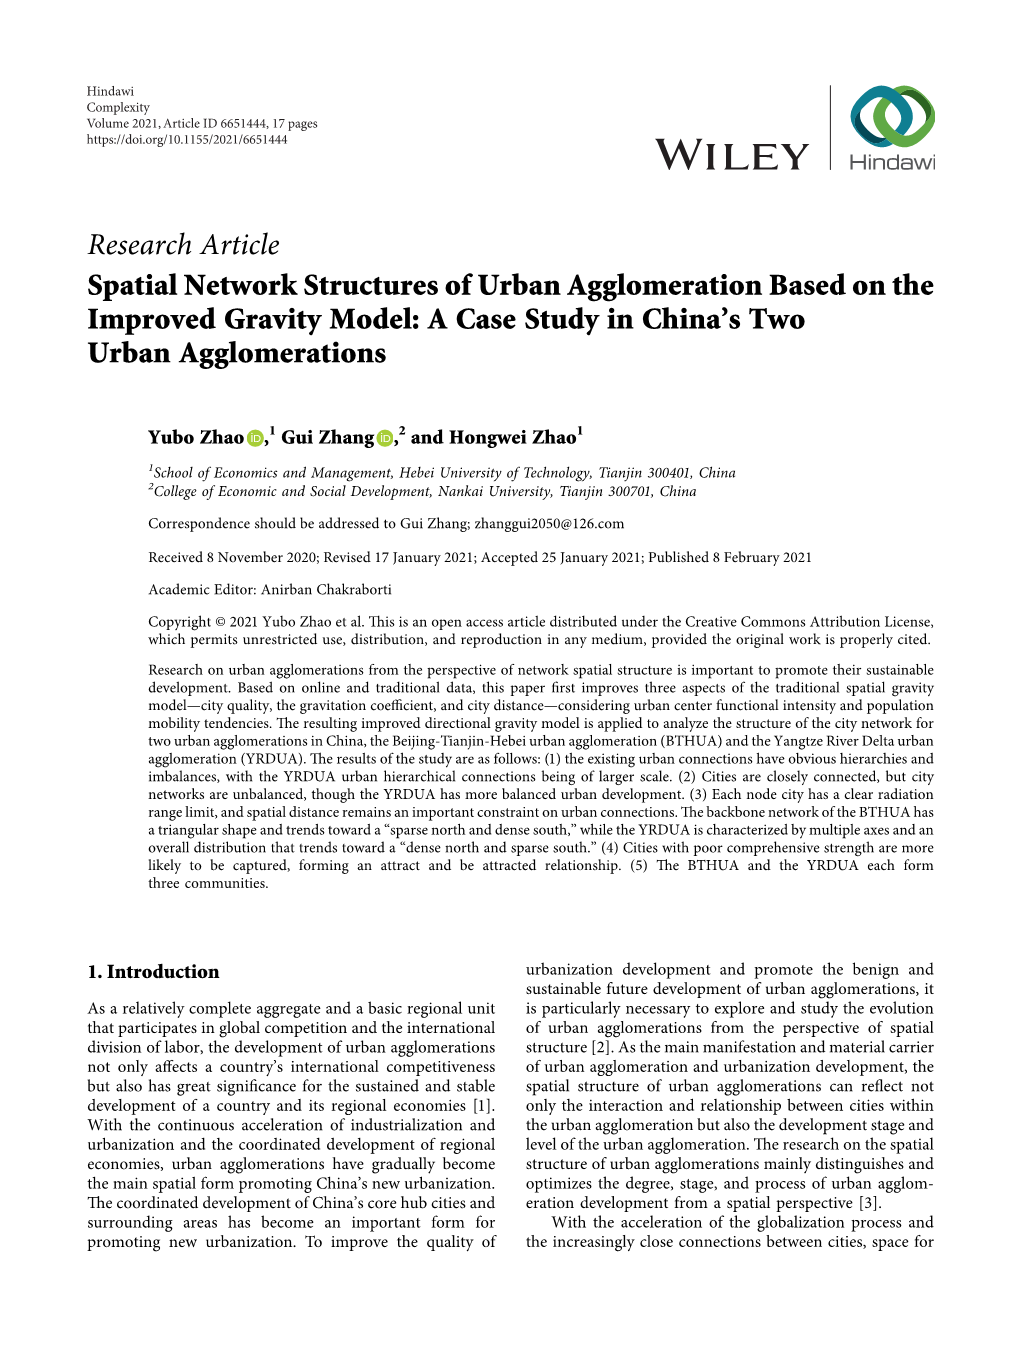 Spatial Network Structures of Urban Agglomeration Based on the Improved Gravity Model: a Case Study in China’S Two Urban Agglomerations